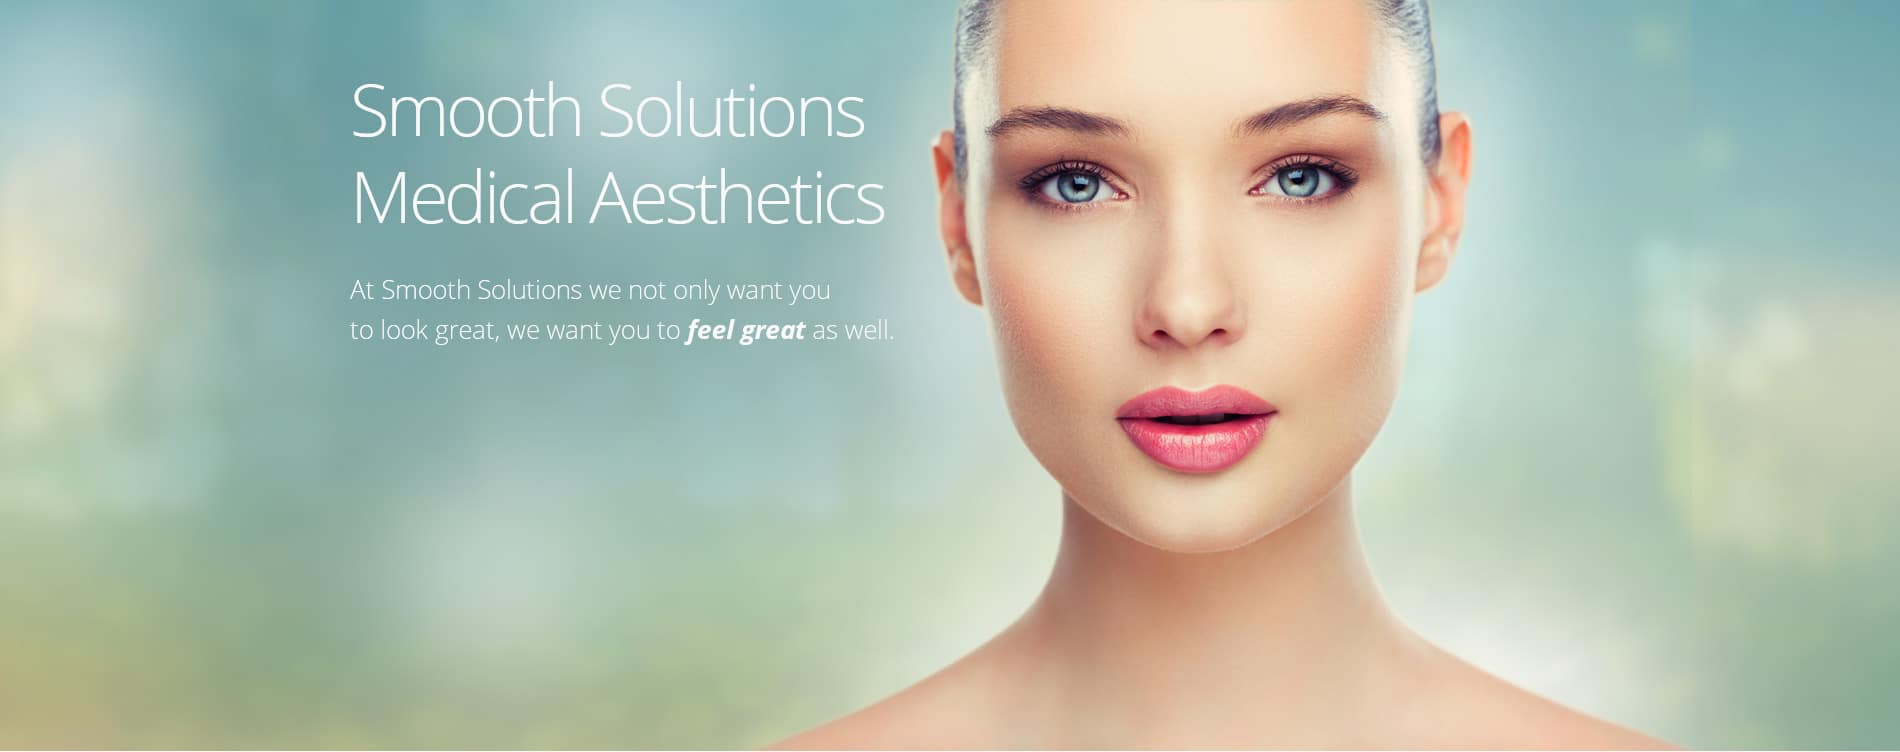 Smooth Solutions Medical Aesthetics in Williamsville serves surrounding areas including Buffalo, Western New, and Southern Ontario